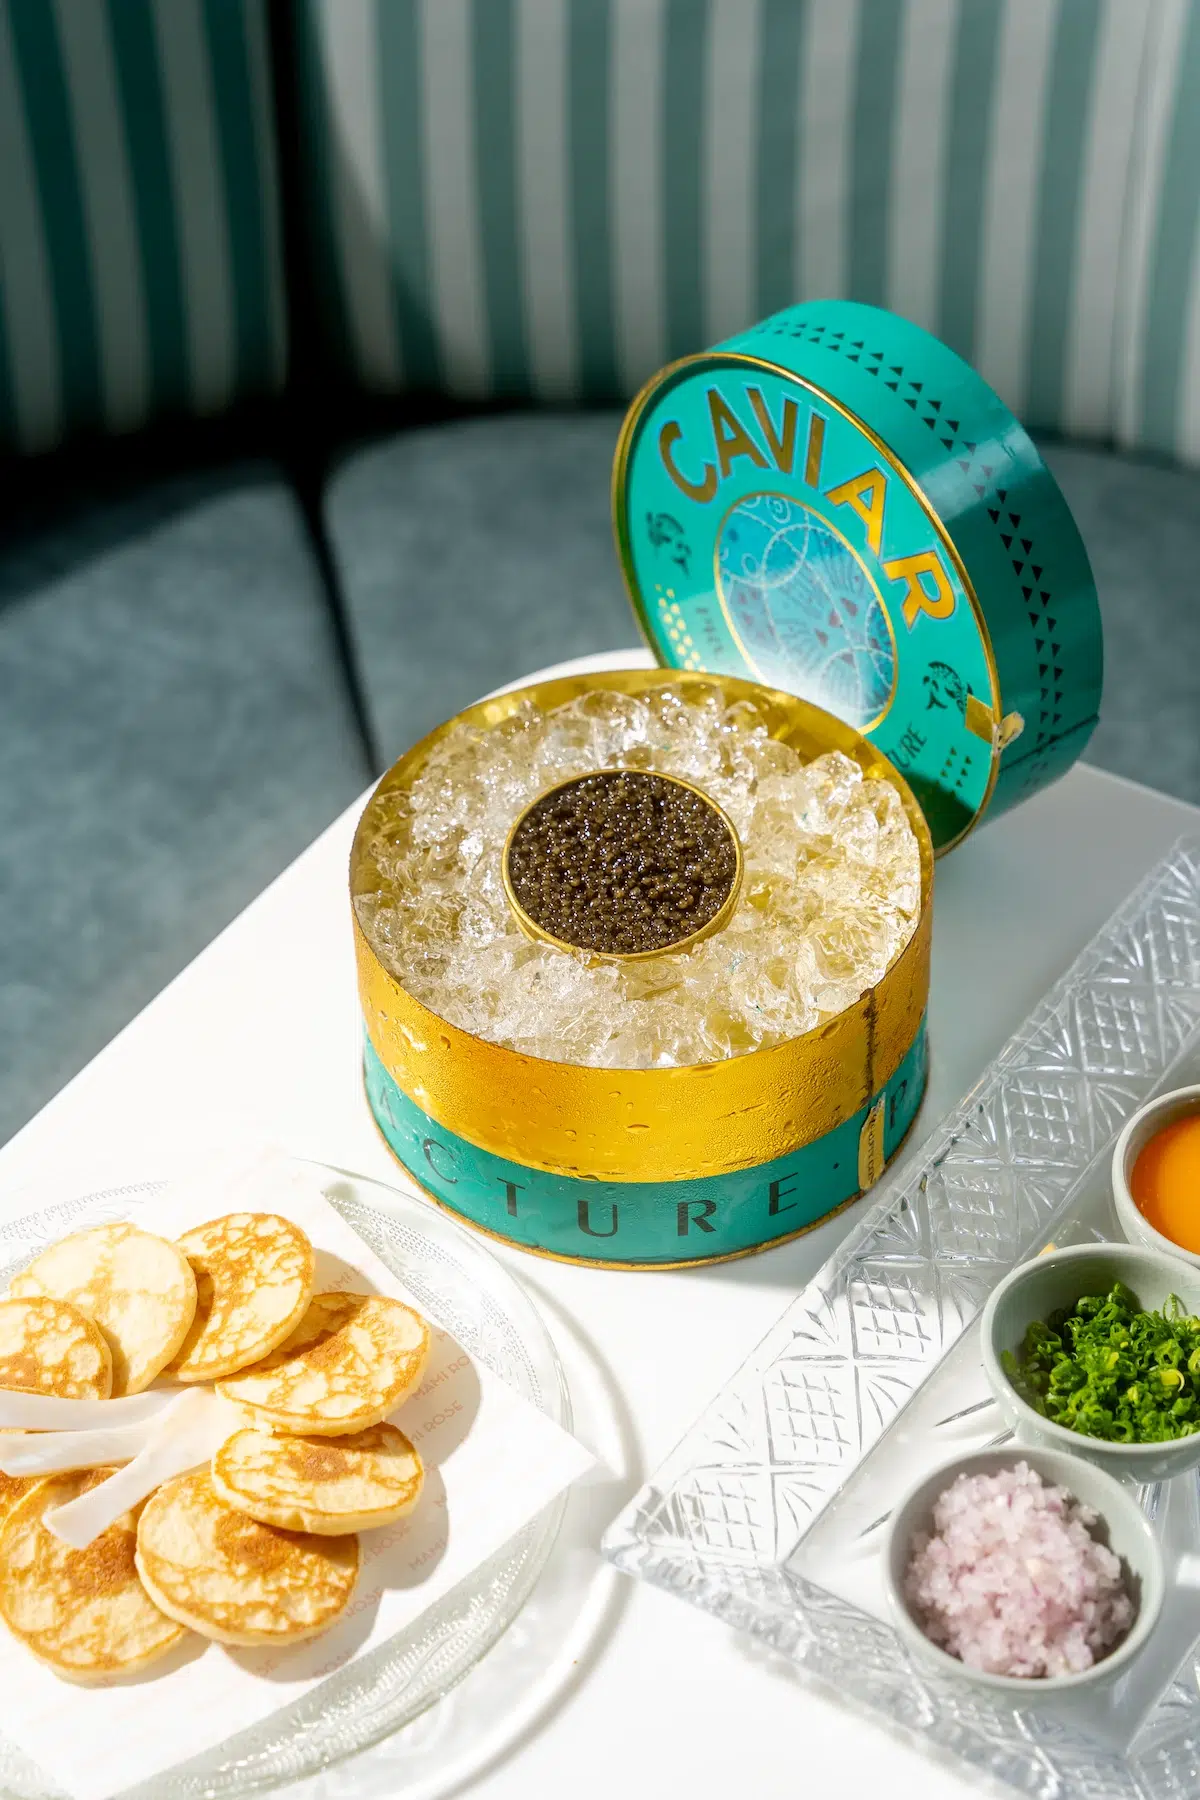 This is the unique Caviar Prunier, served with blinis and sauce, from Mami Rose Restaurant located in EmSphere mall on 5th floor in Bangkok.